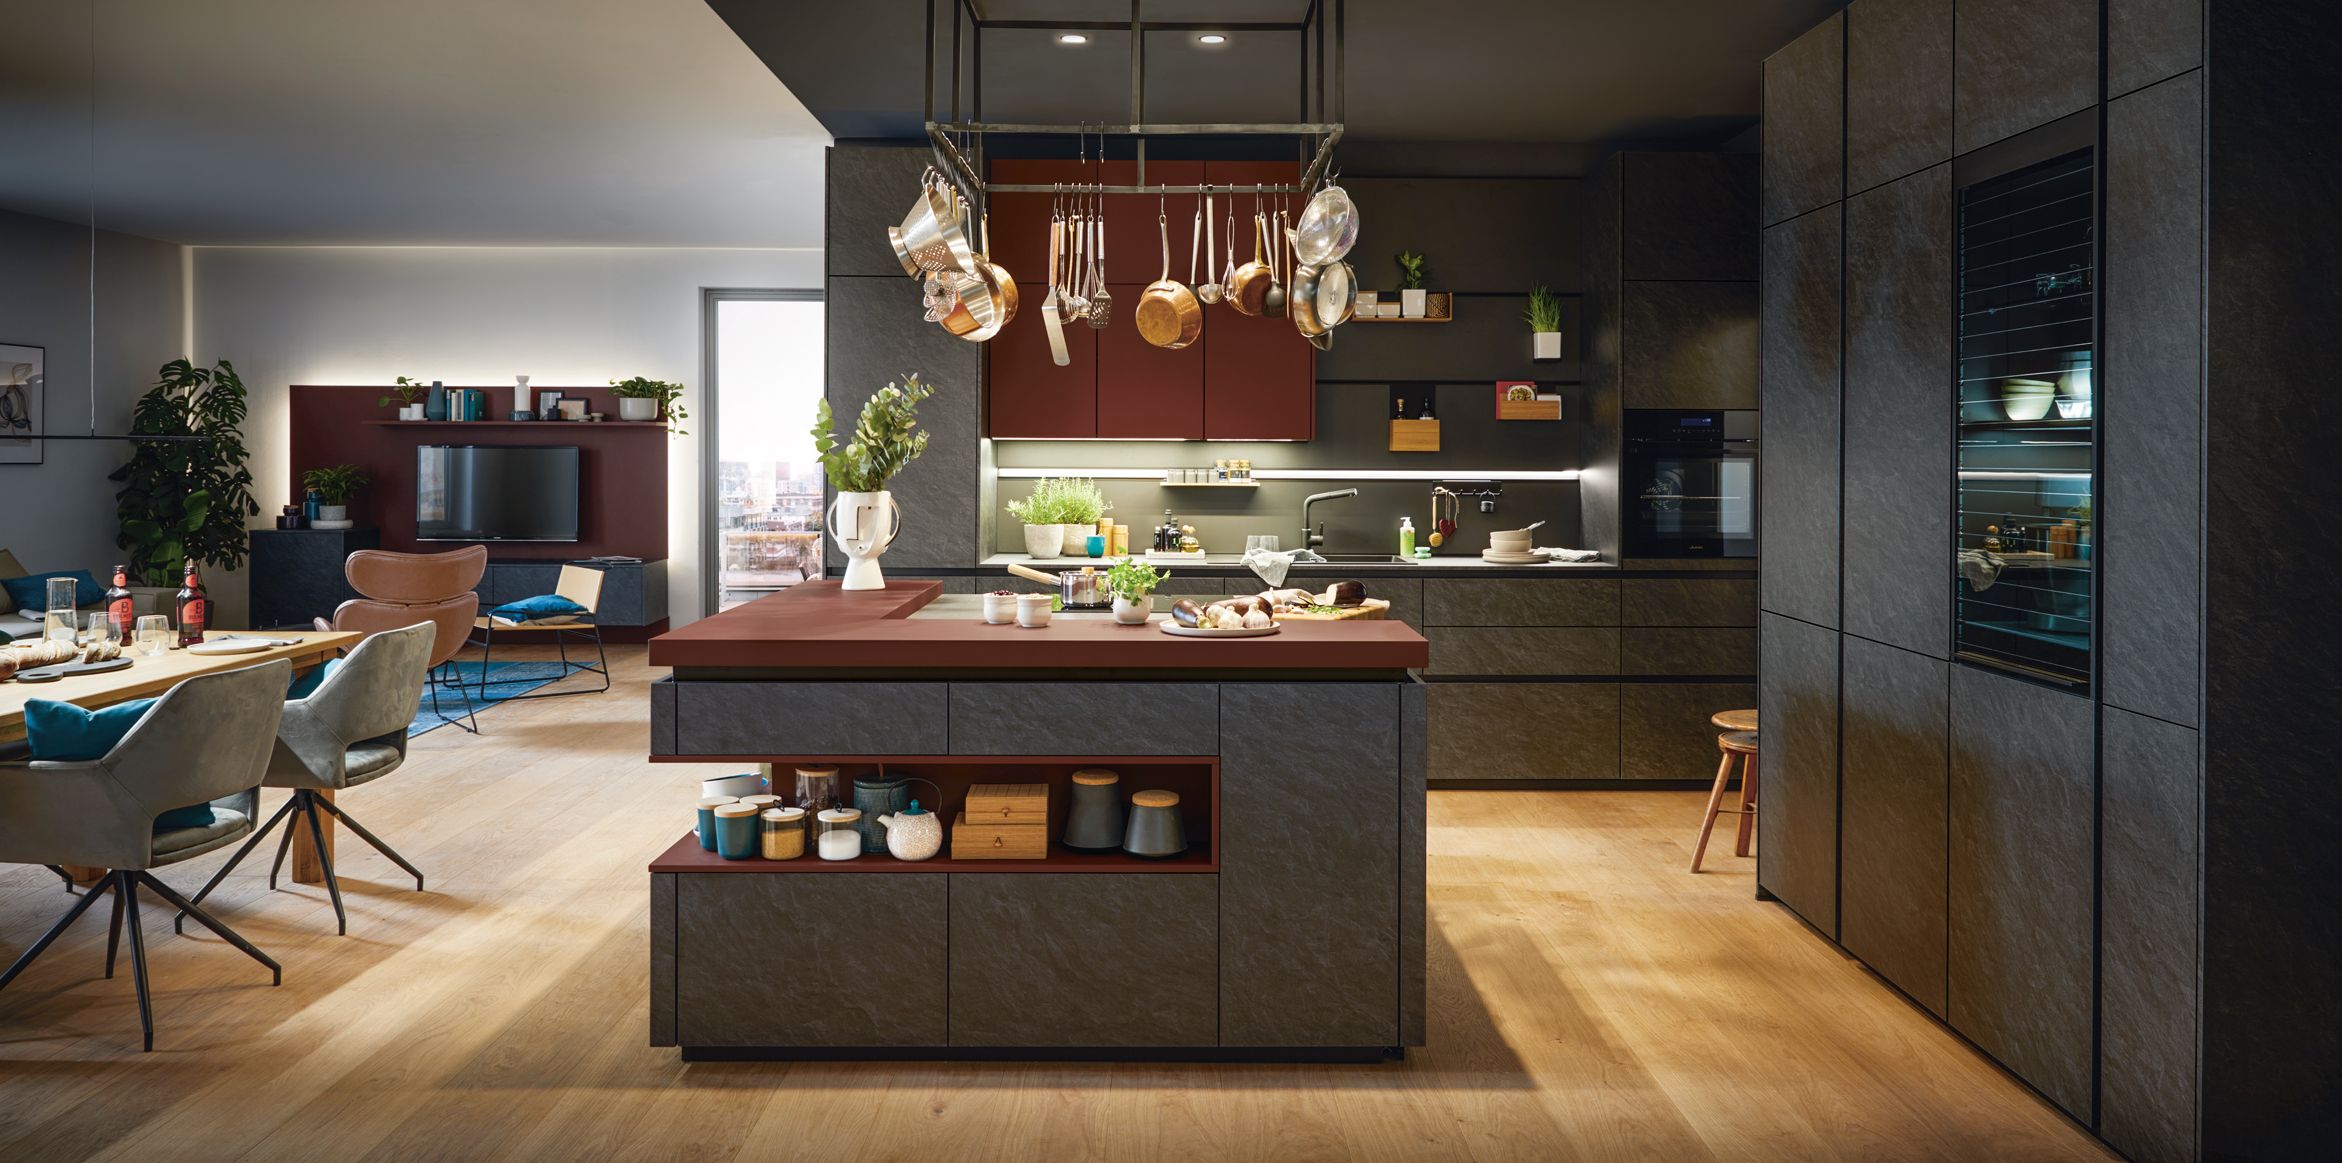 Why Are Schüller Kitchens So Popular?